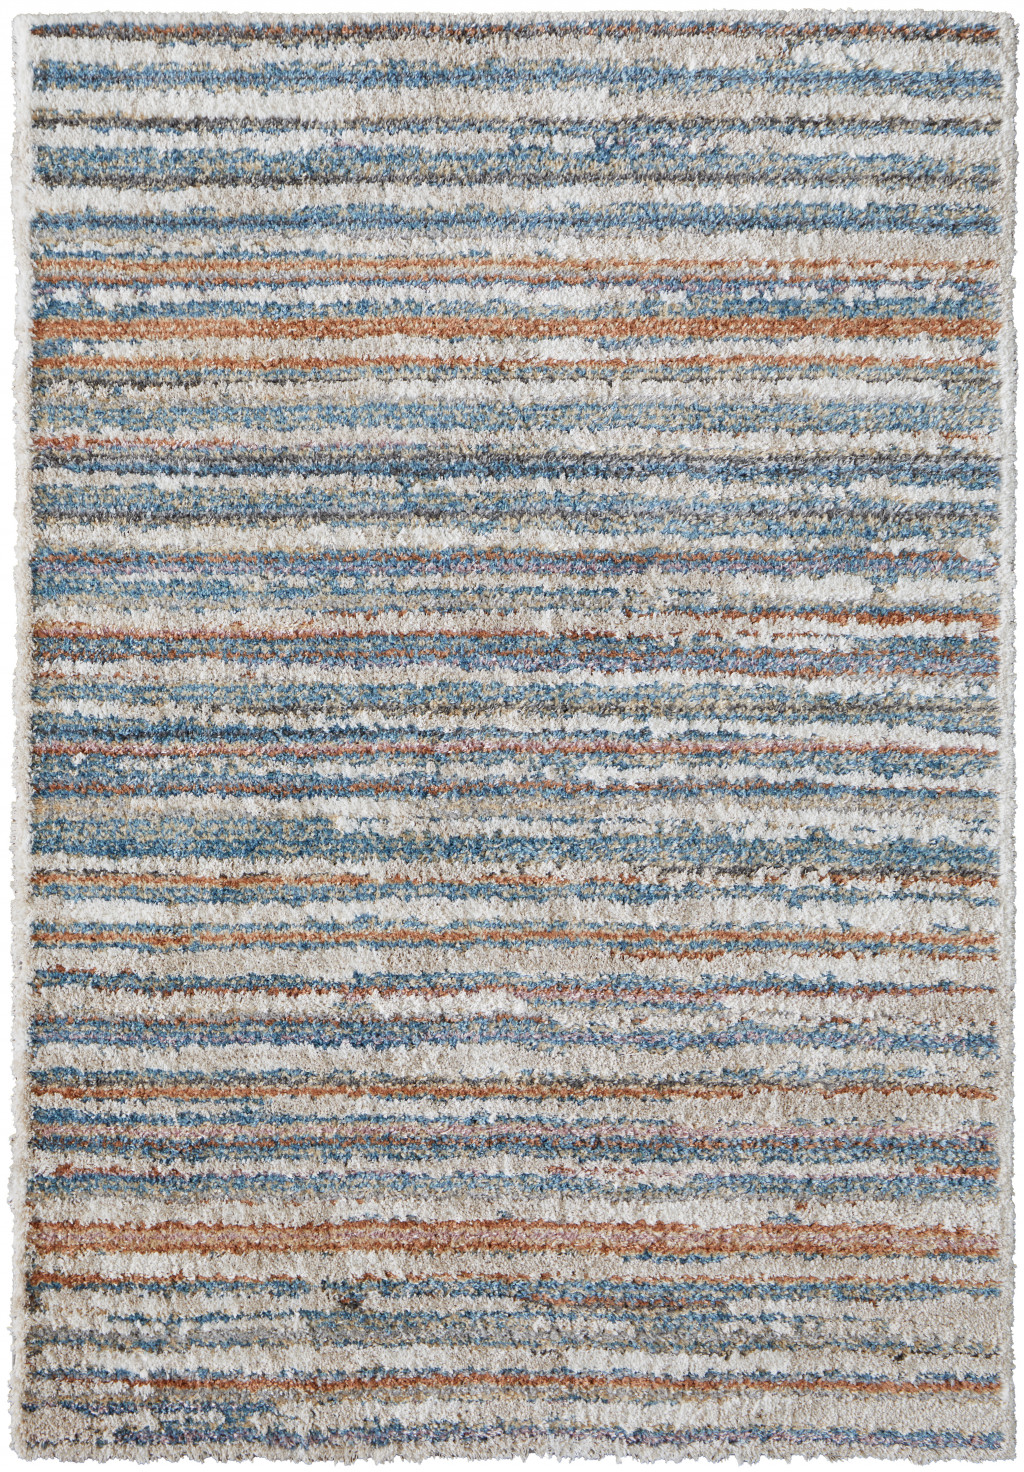 8' X 10' Ivory Blue And Orange Striped Power Loom Stain Resistant Area Rug-514530-1